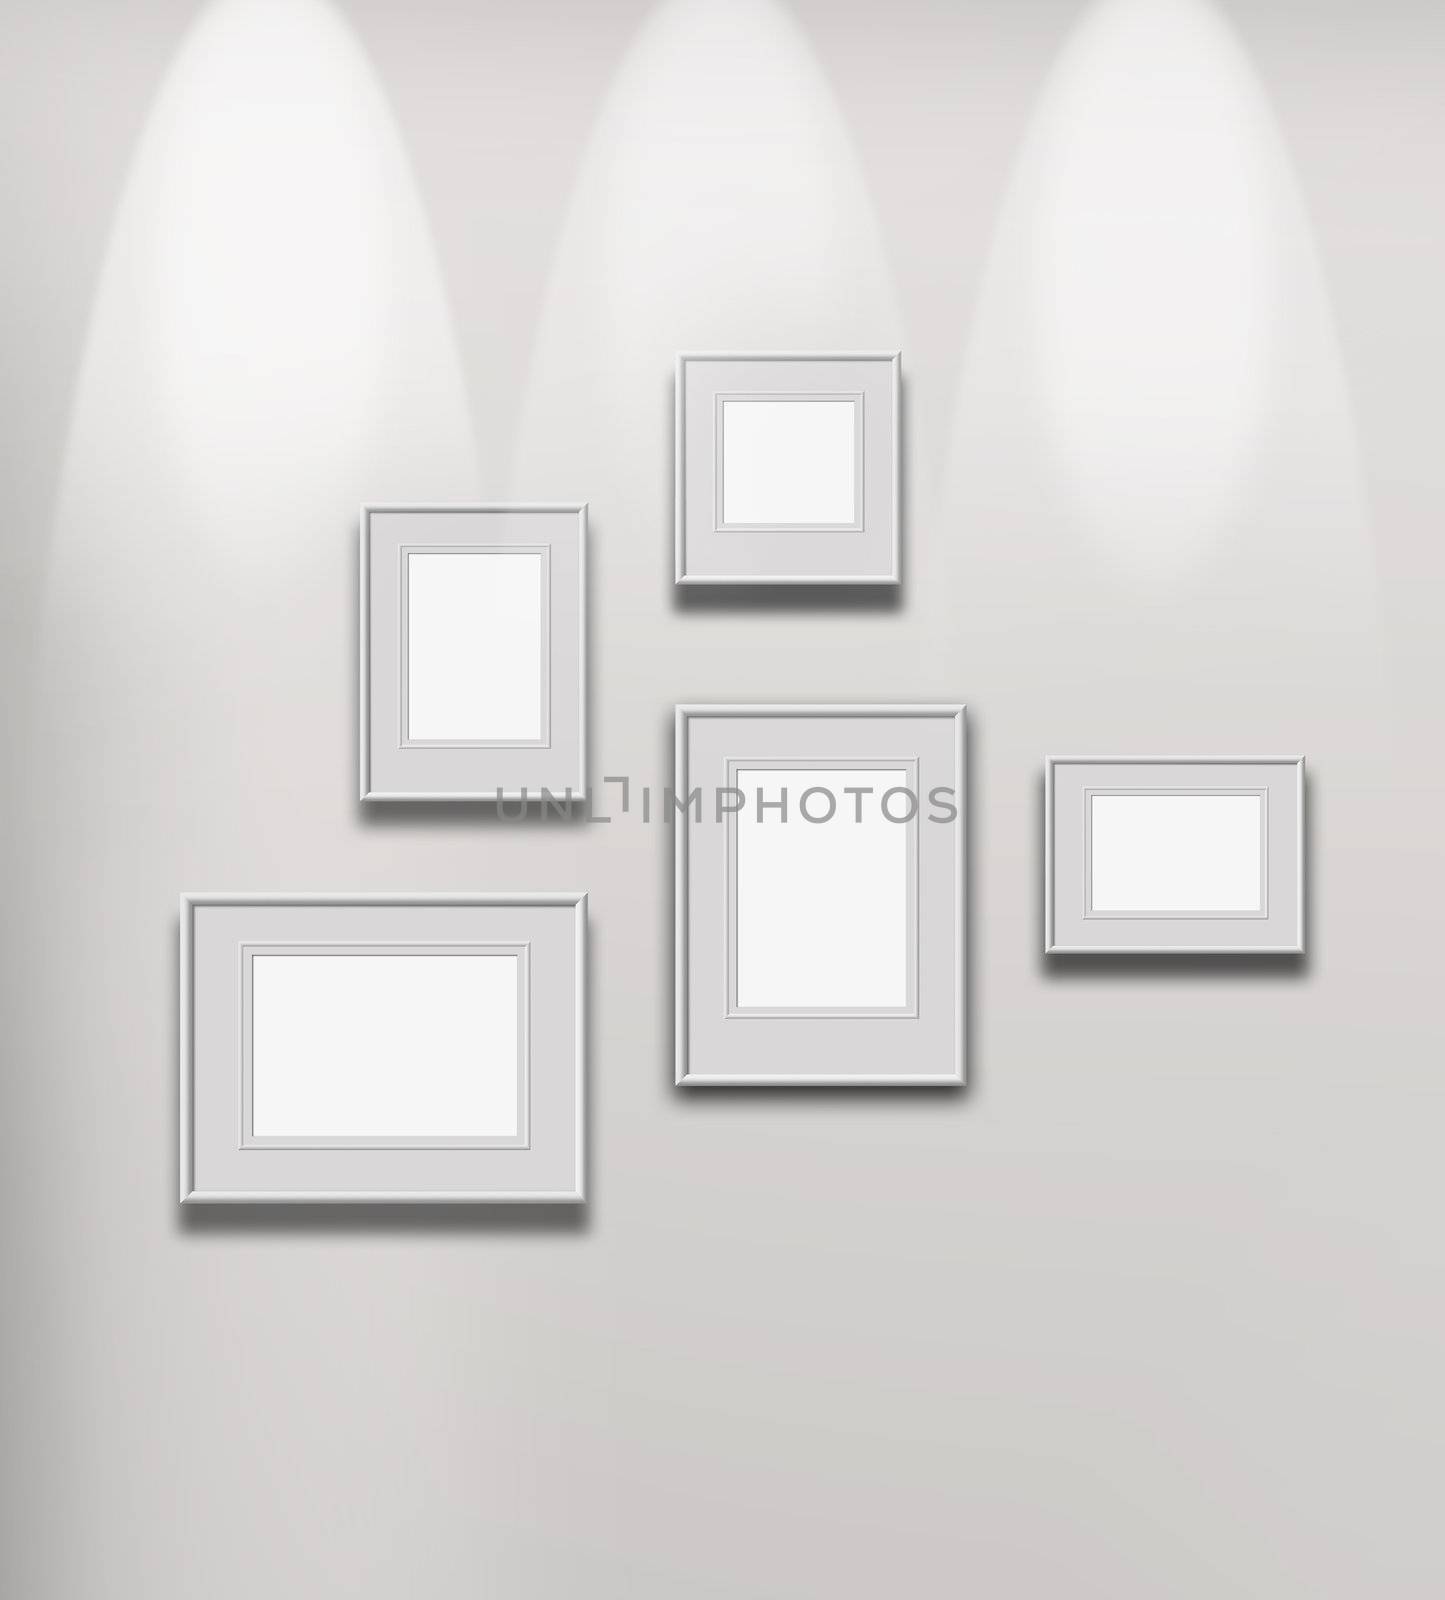 Picture gallery exhibition illuminated space empty frames collection